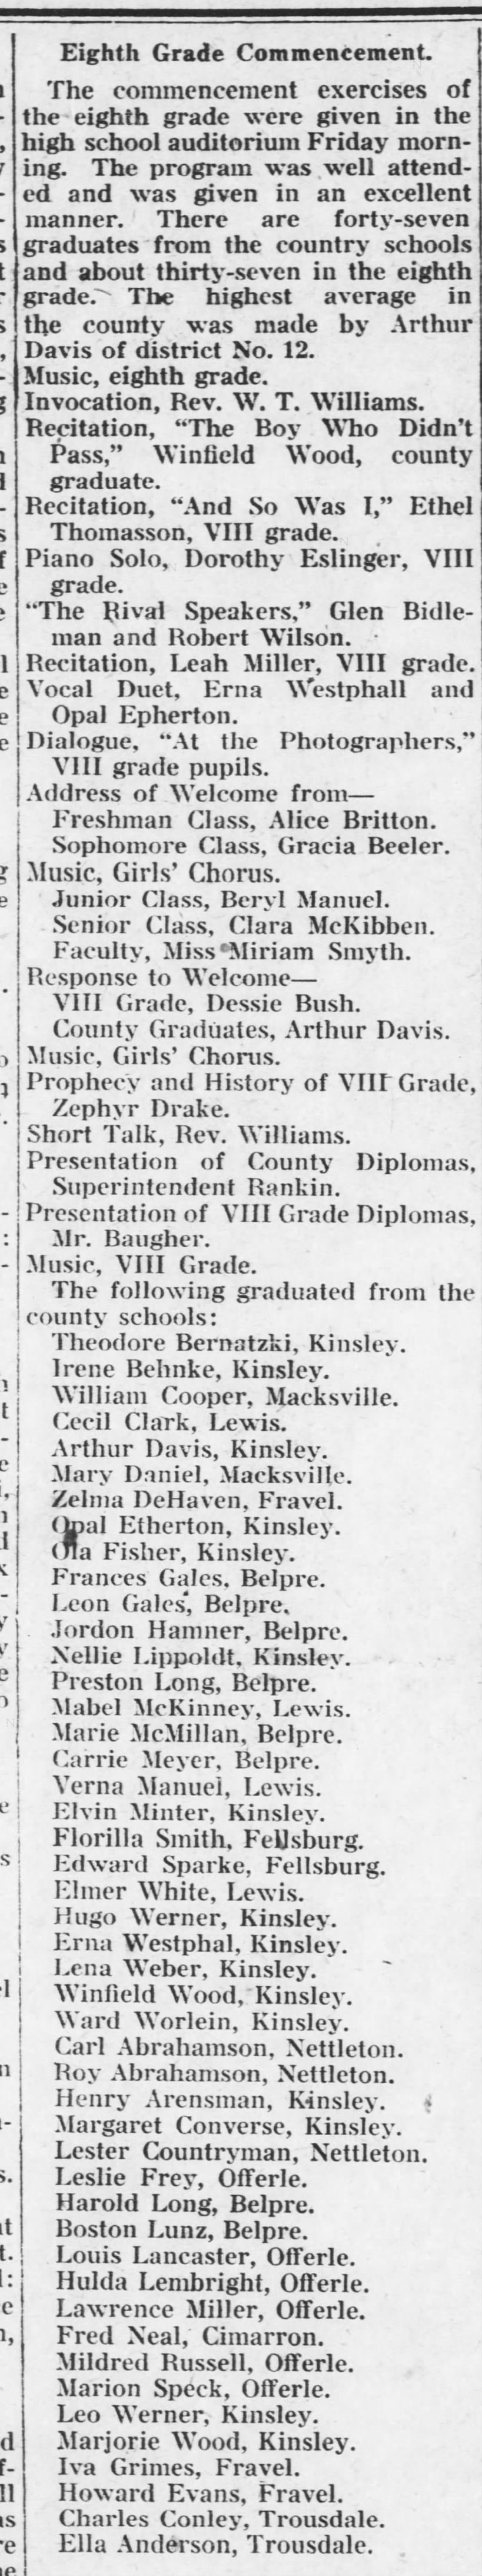 Etherton, Opal - 8th Grade Commencement
Kinsley Mercury - 24 May 1917, pg 1